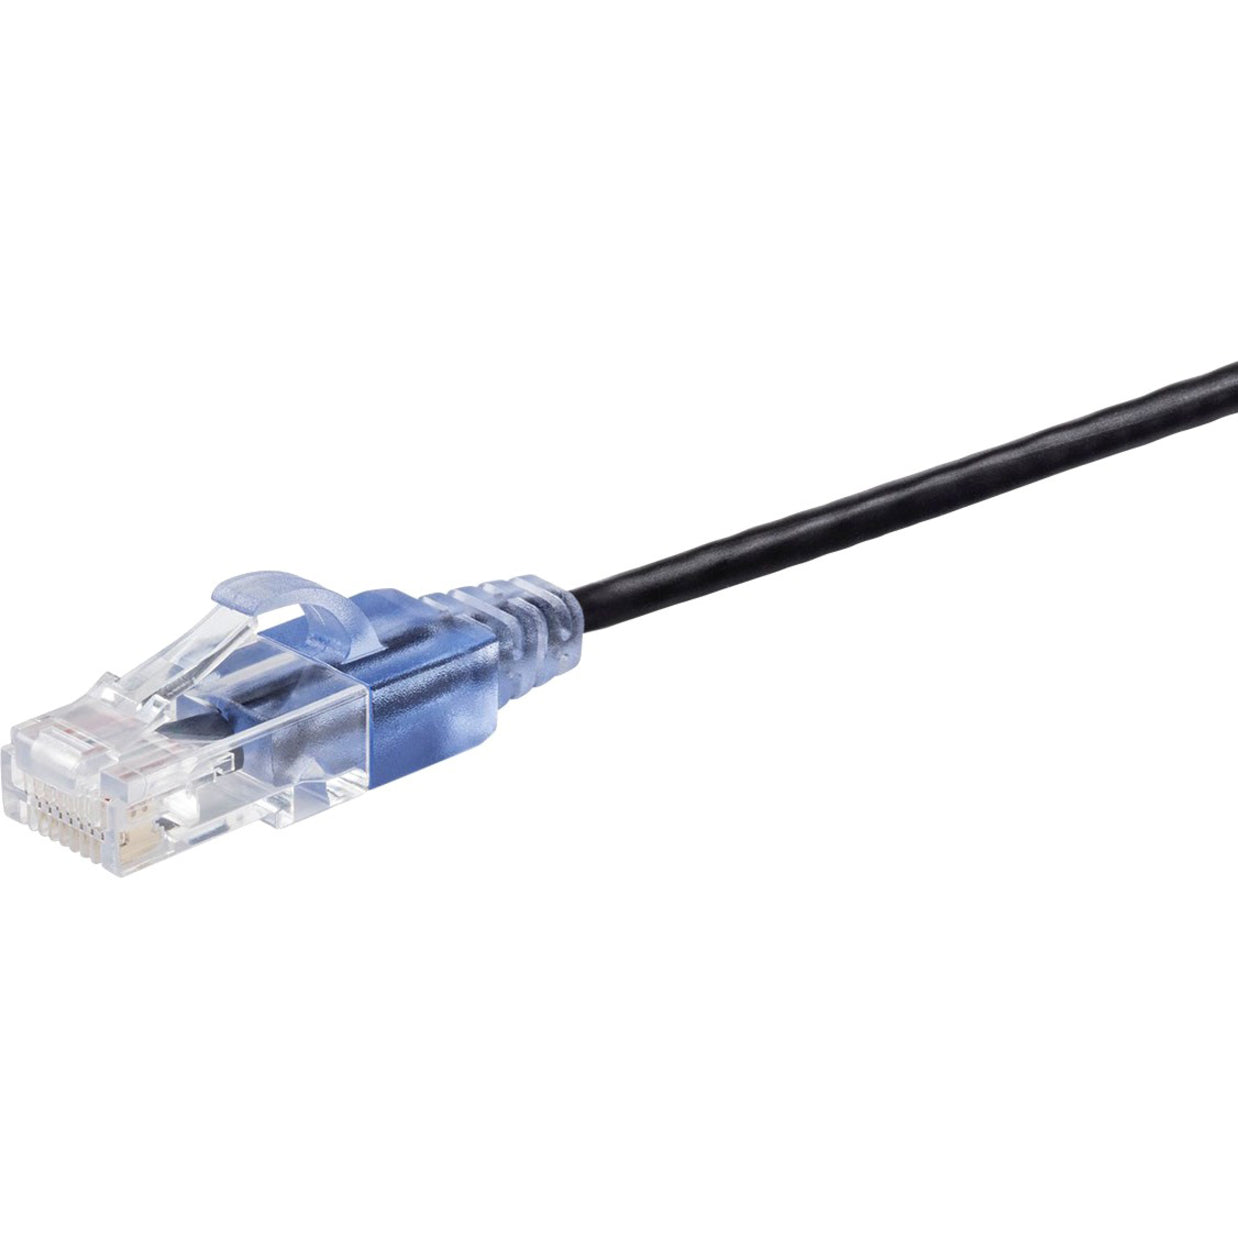 Monoprice 15165 SlimRun Cat6A Ethernet Network Patch Cable, 10-Pack, 10ft Black